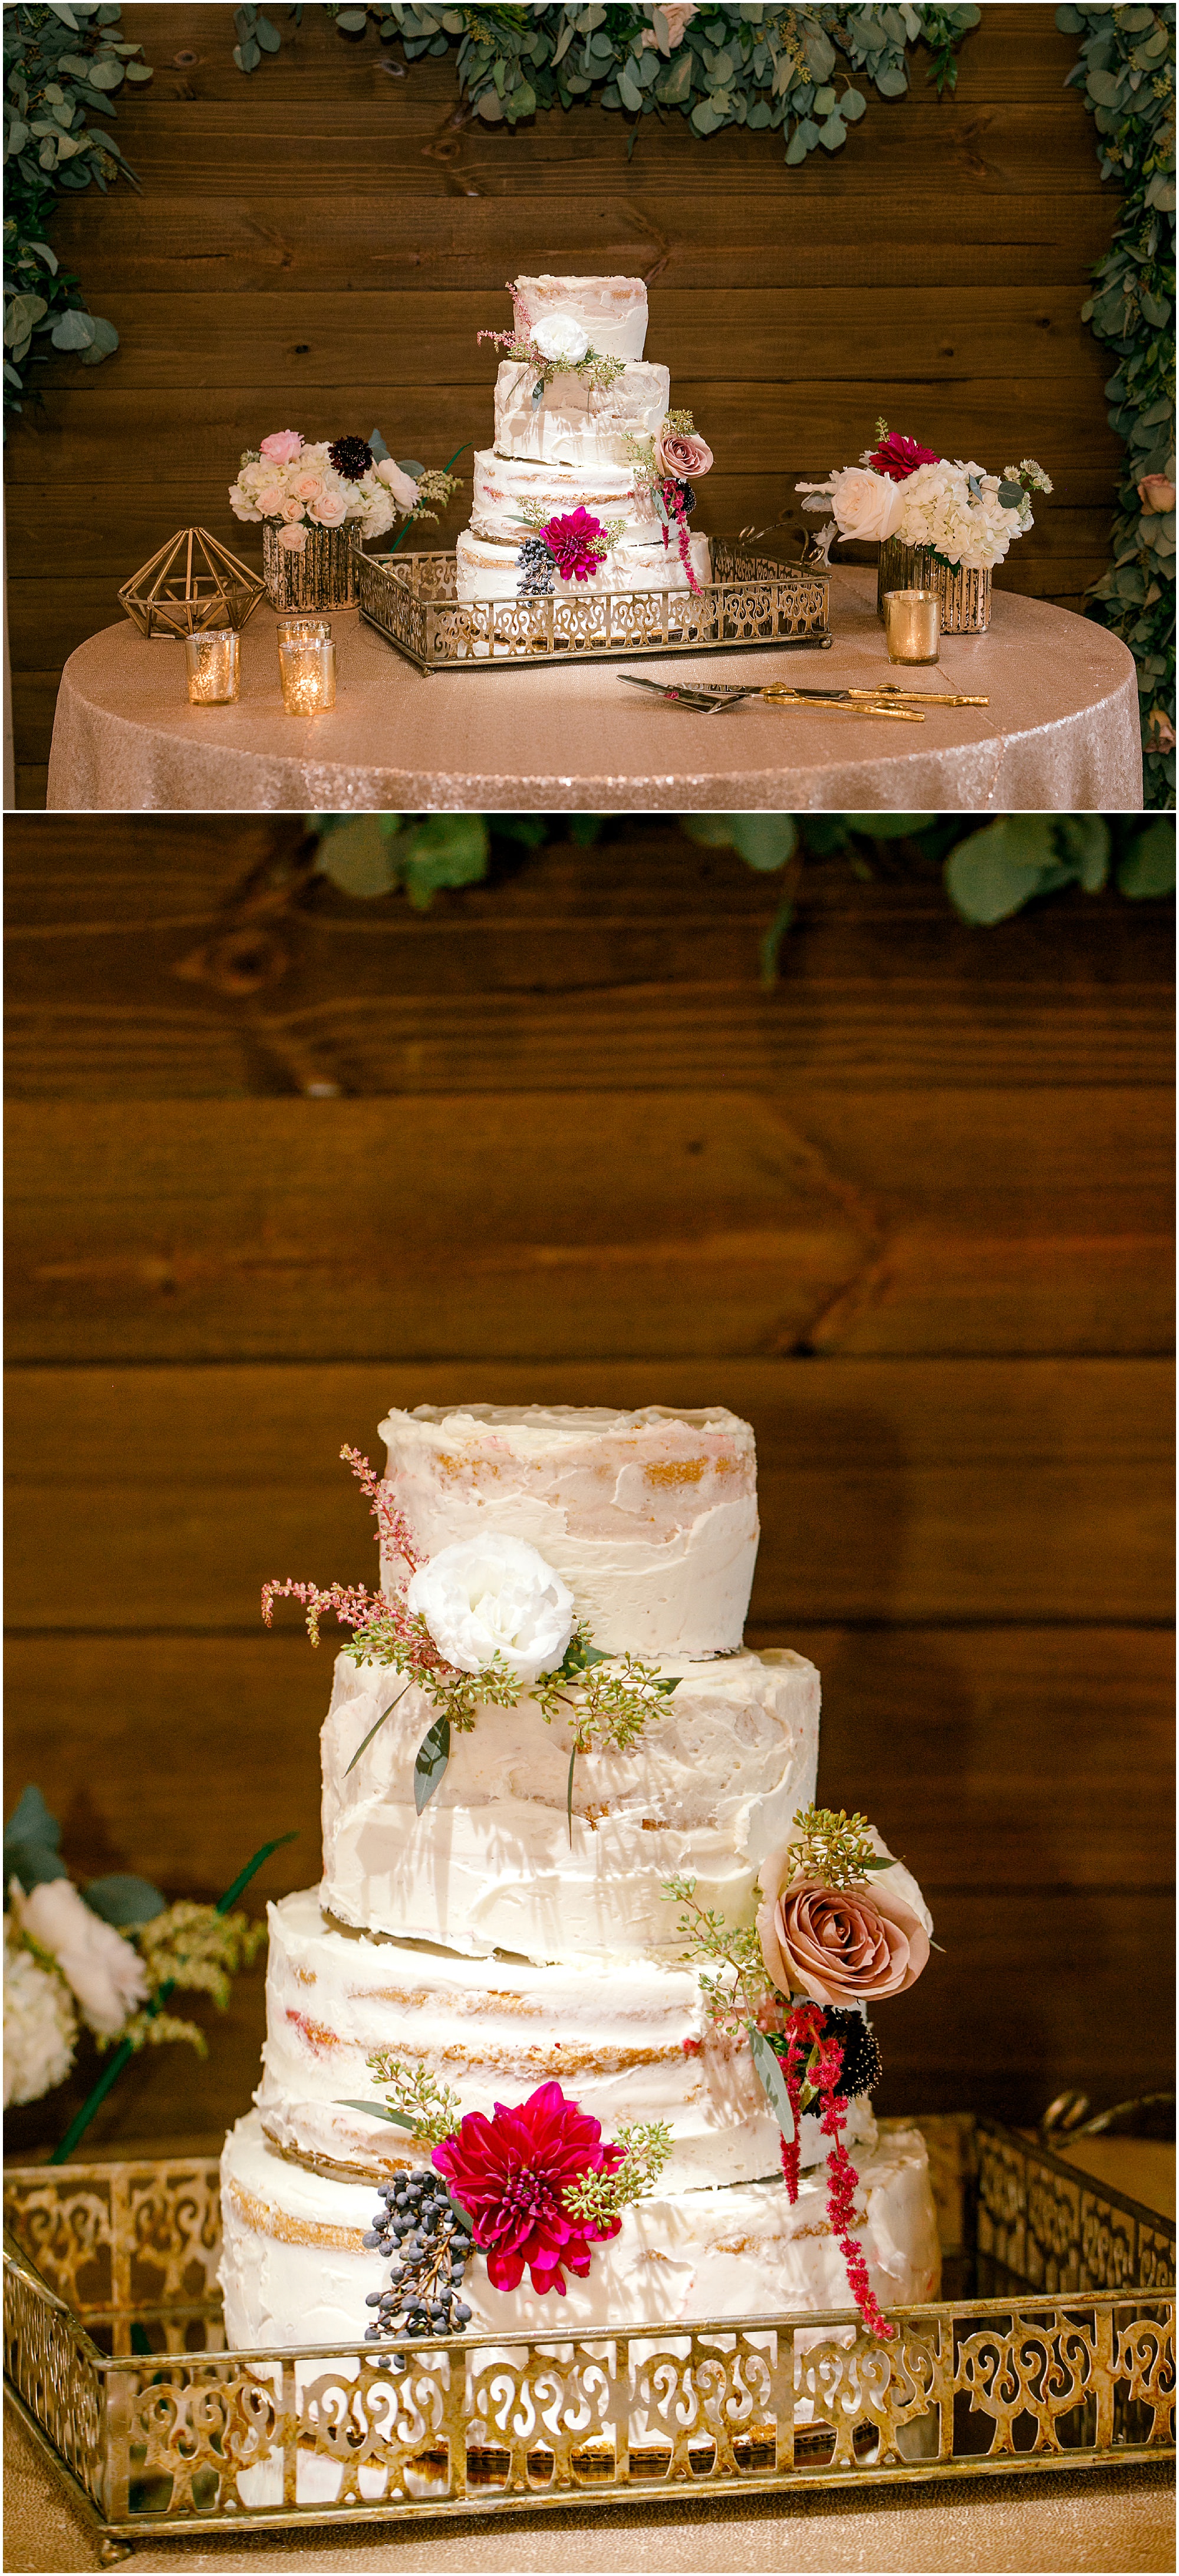 Rustic frosted wedding cake